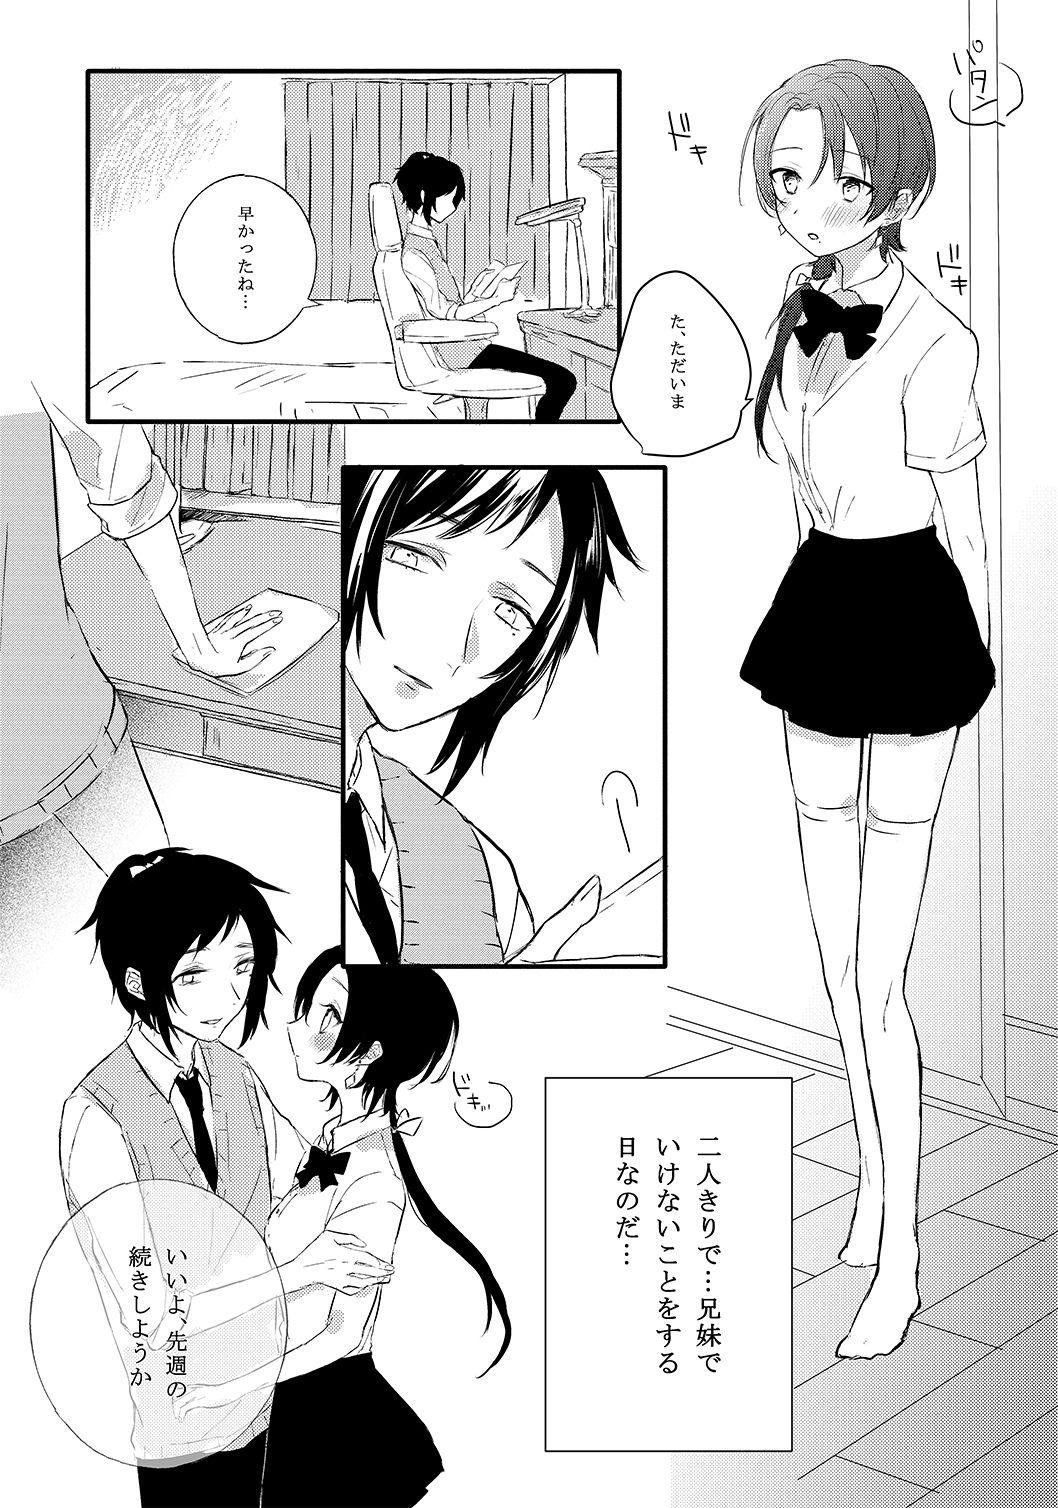 Harcore BROTHER COMPLEX + SISTER COMPLEX - Touken ranbu Cdzinha - Page 4